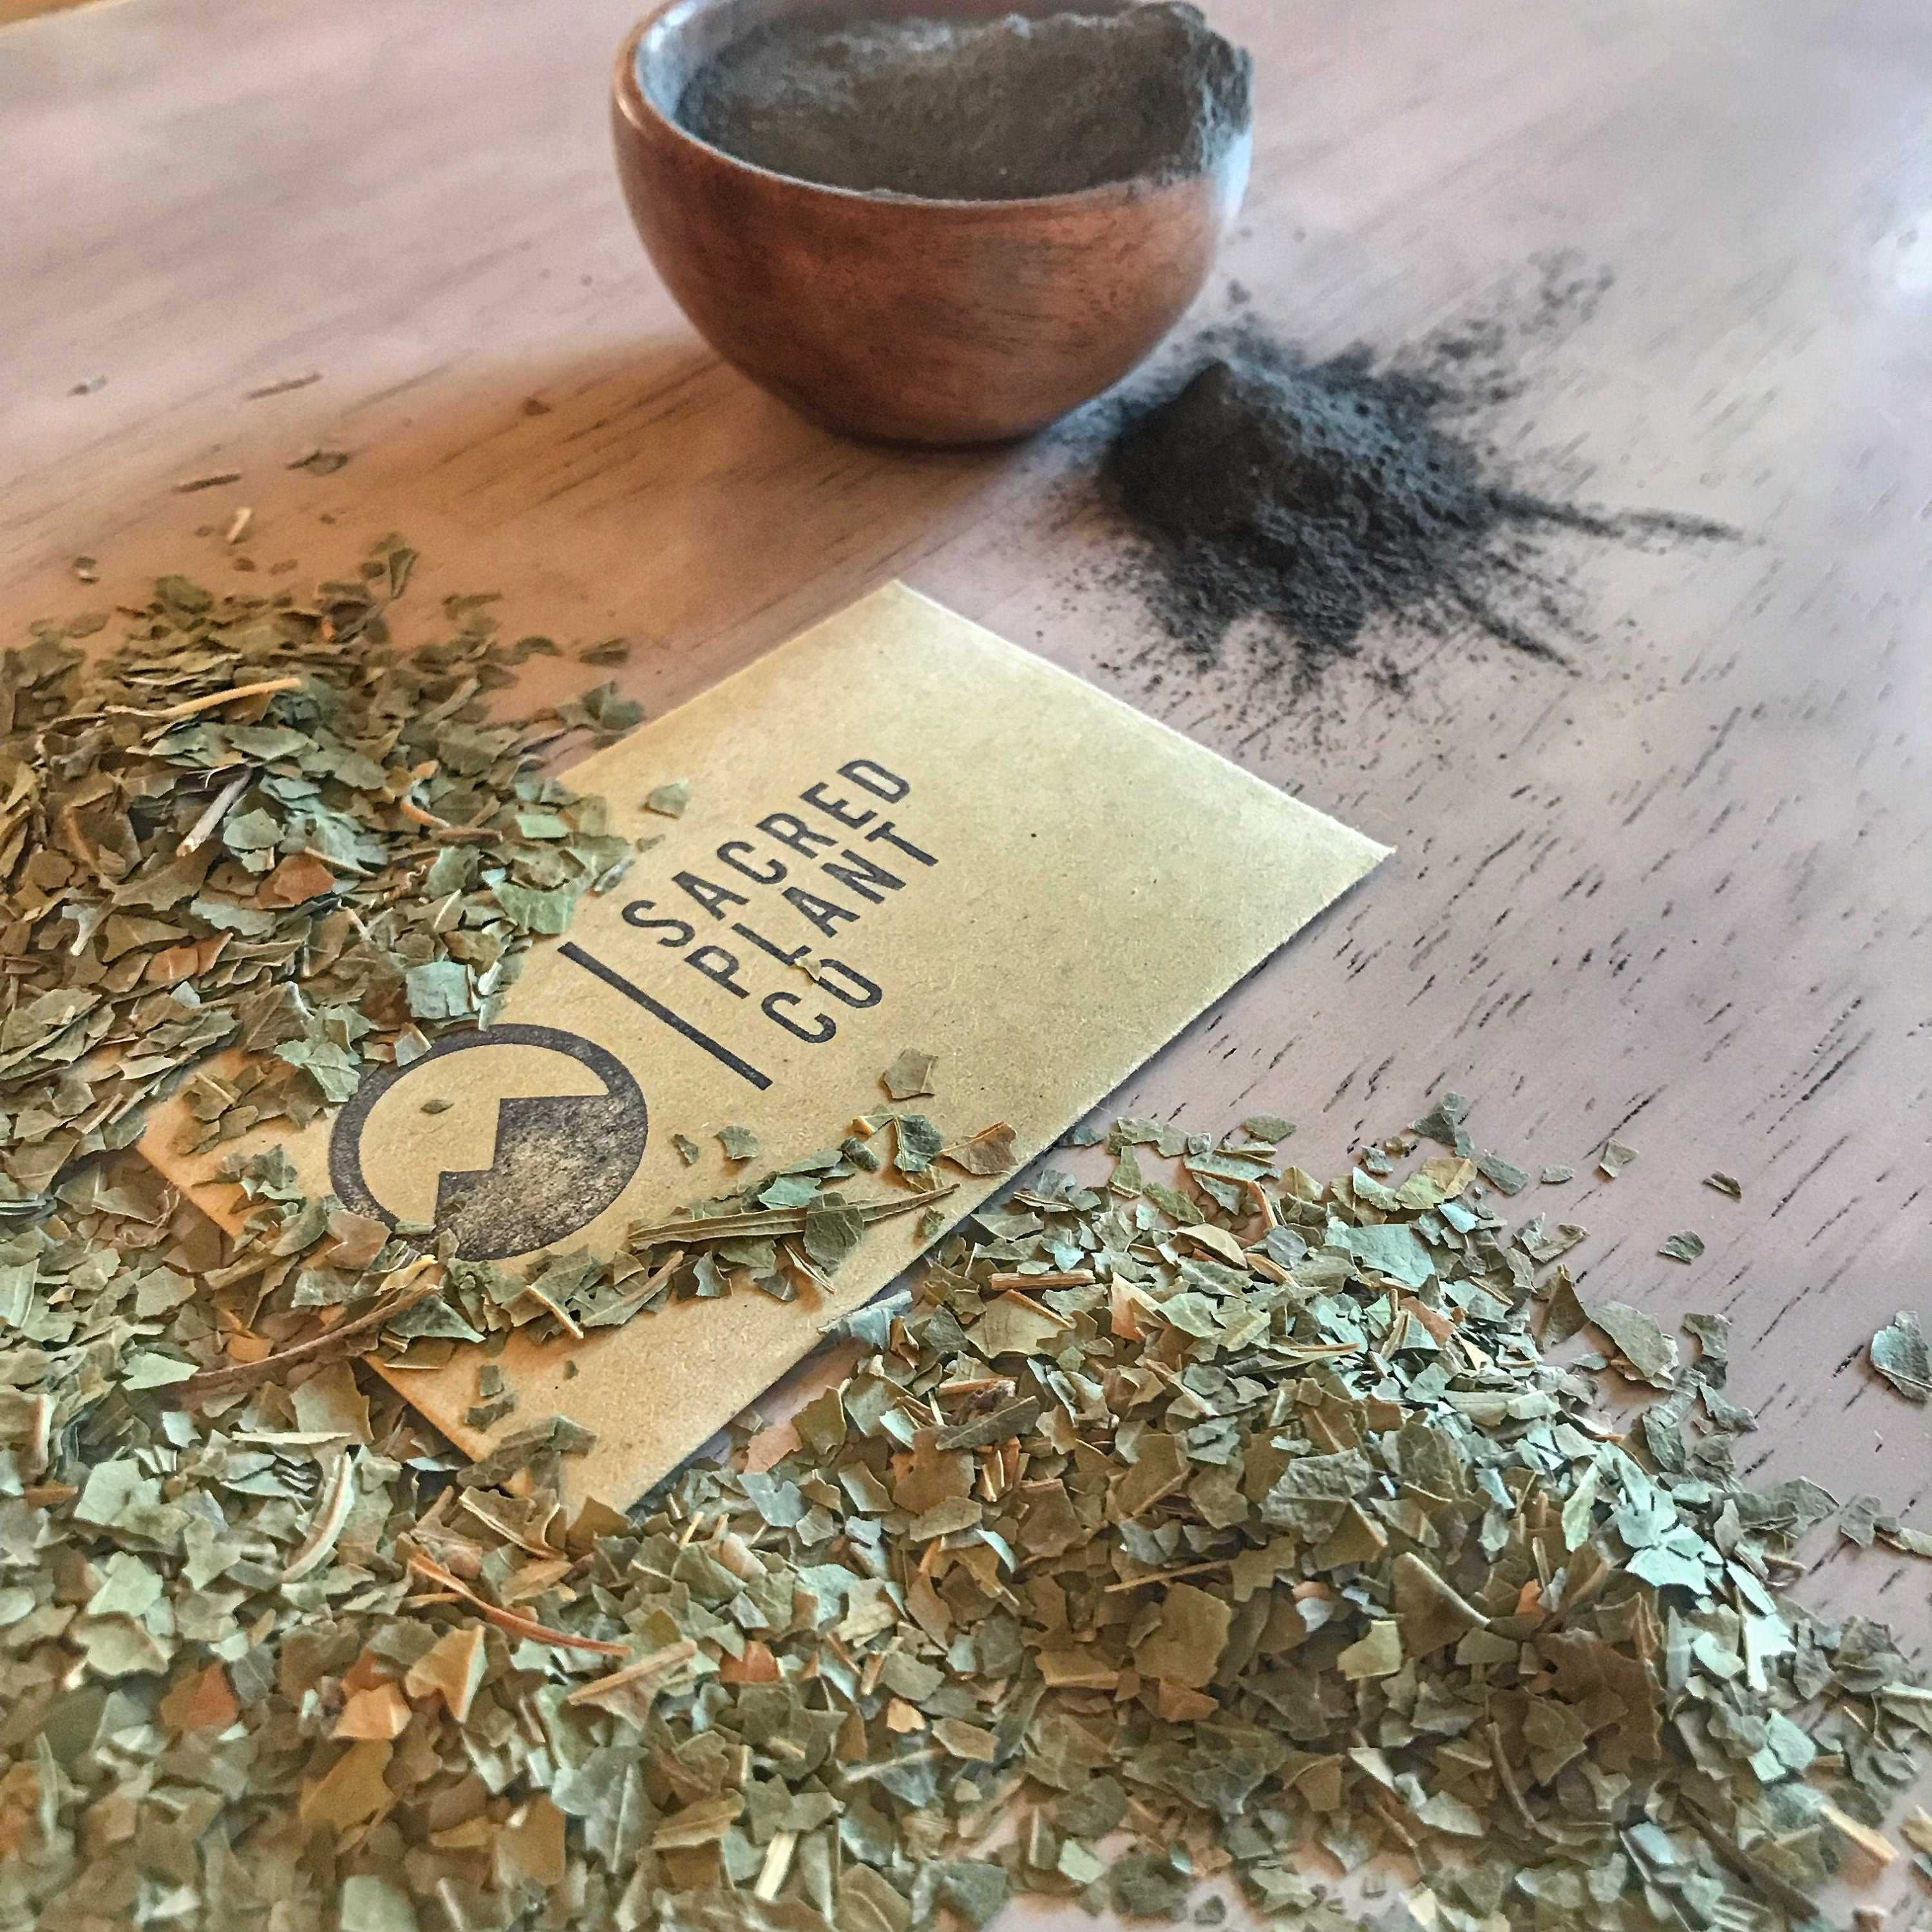 A dynamic arrangement on a wooden surface, featuring a scattering of crushed green leaves and a sprinkling of gray face mask powder. A golden business card for Sacred Plant Co is partially covered by the leaves, and a small wooden bowl rests in the background.